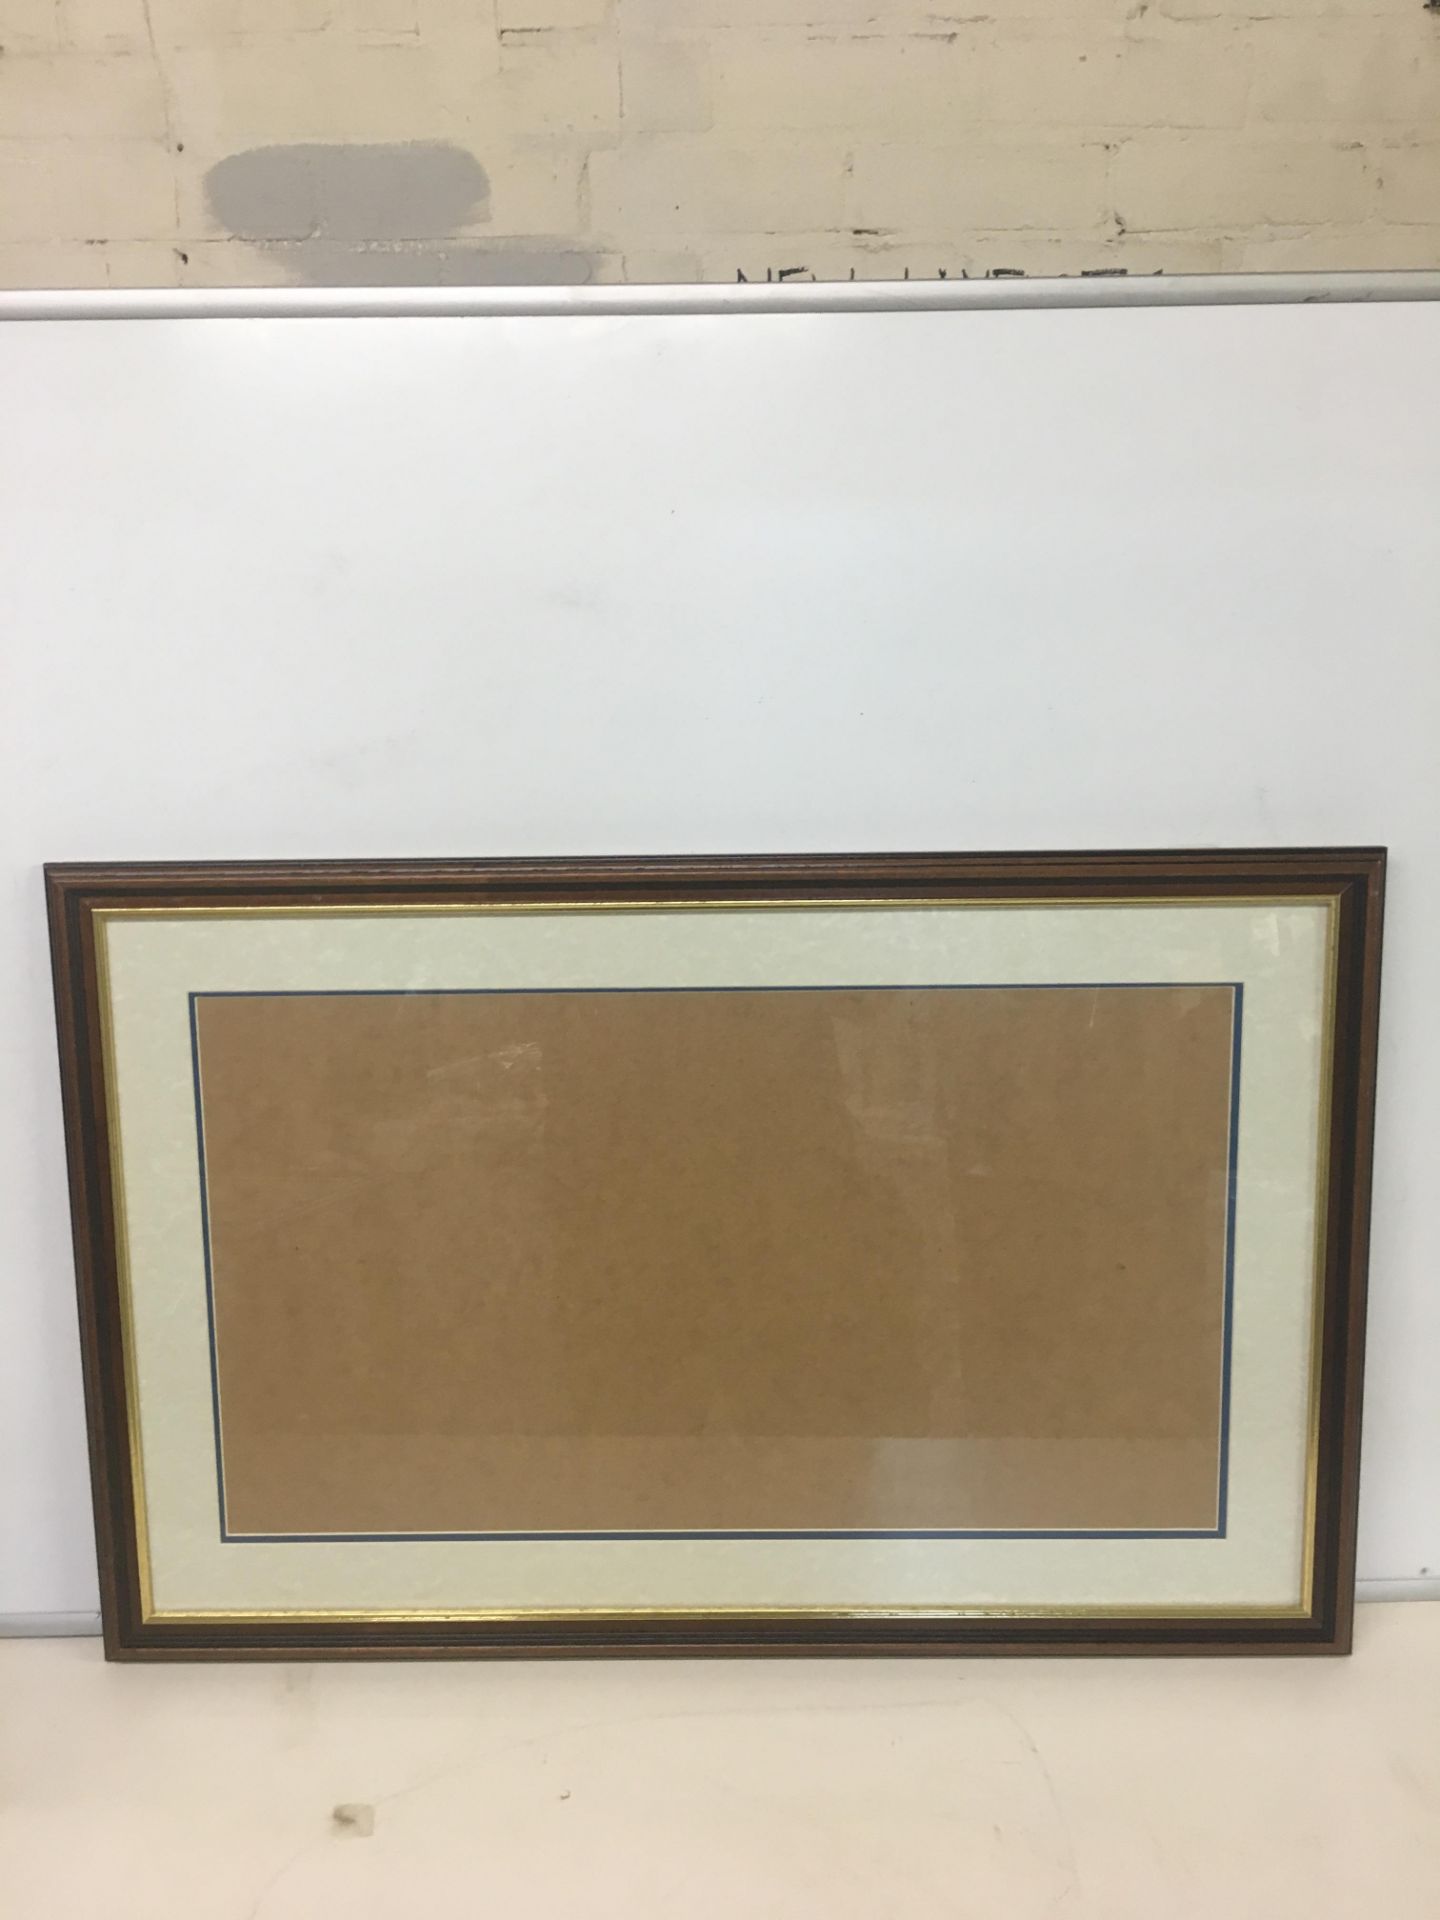 2 x Light brown / dark brown and gold framed empty picture frames